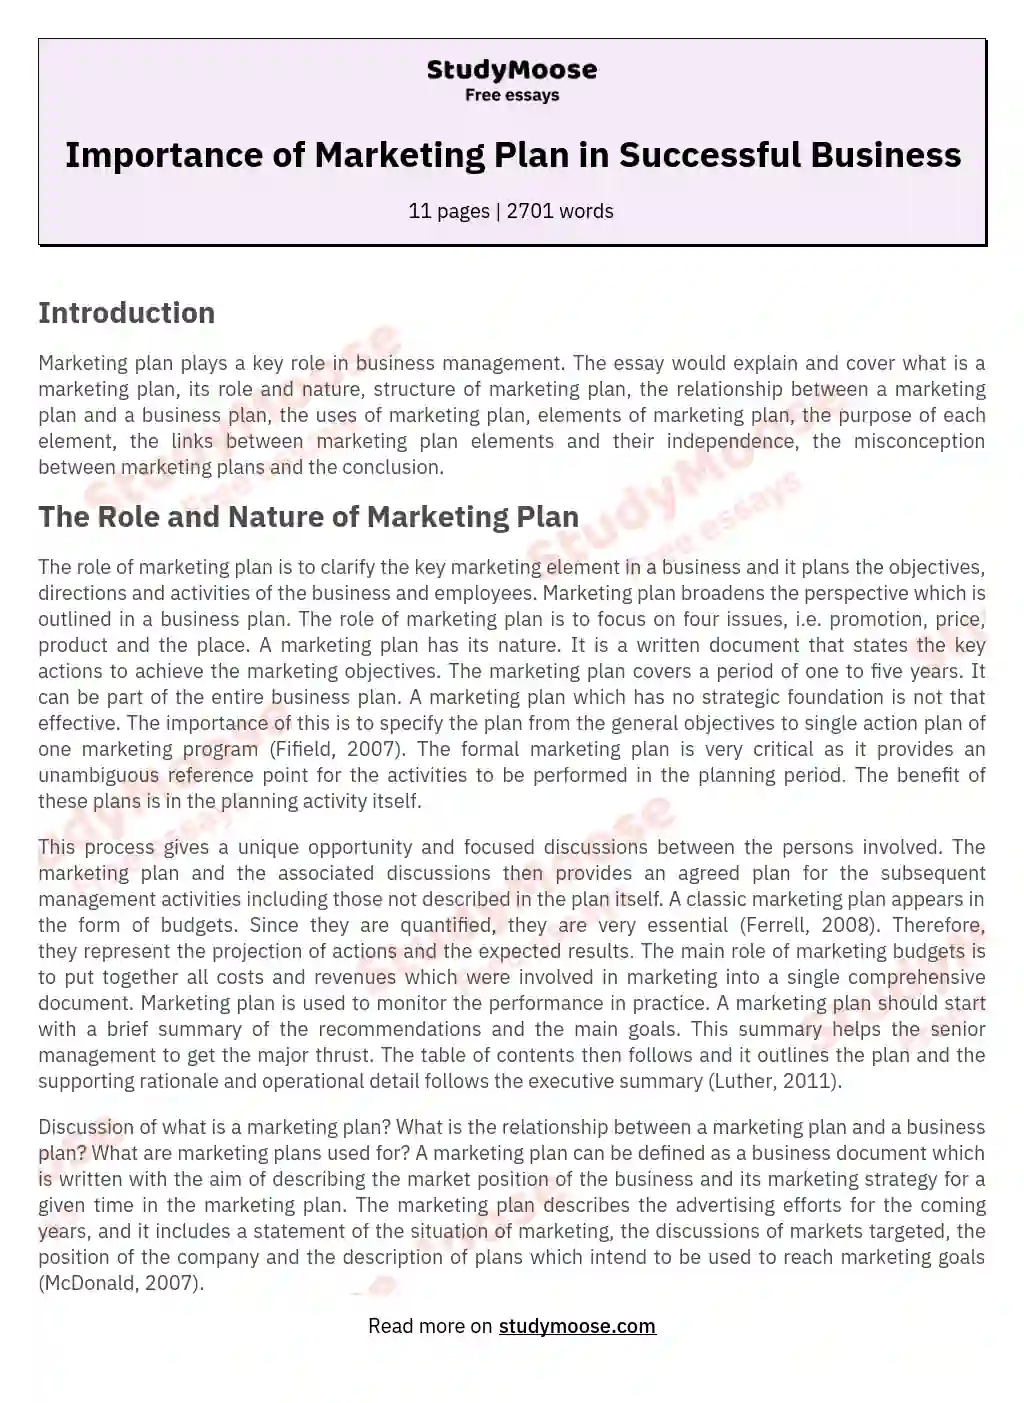 Importance of Marketing Plan in Successful Business essay